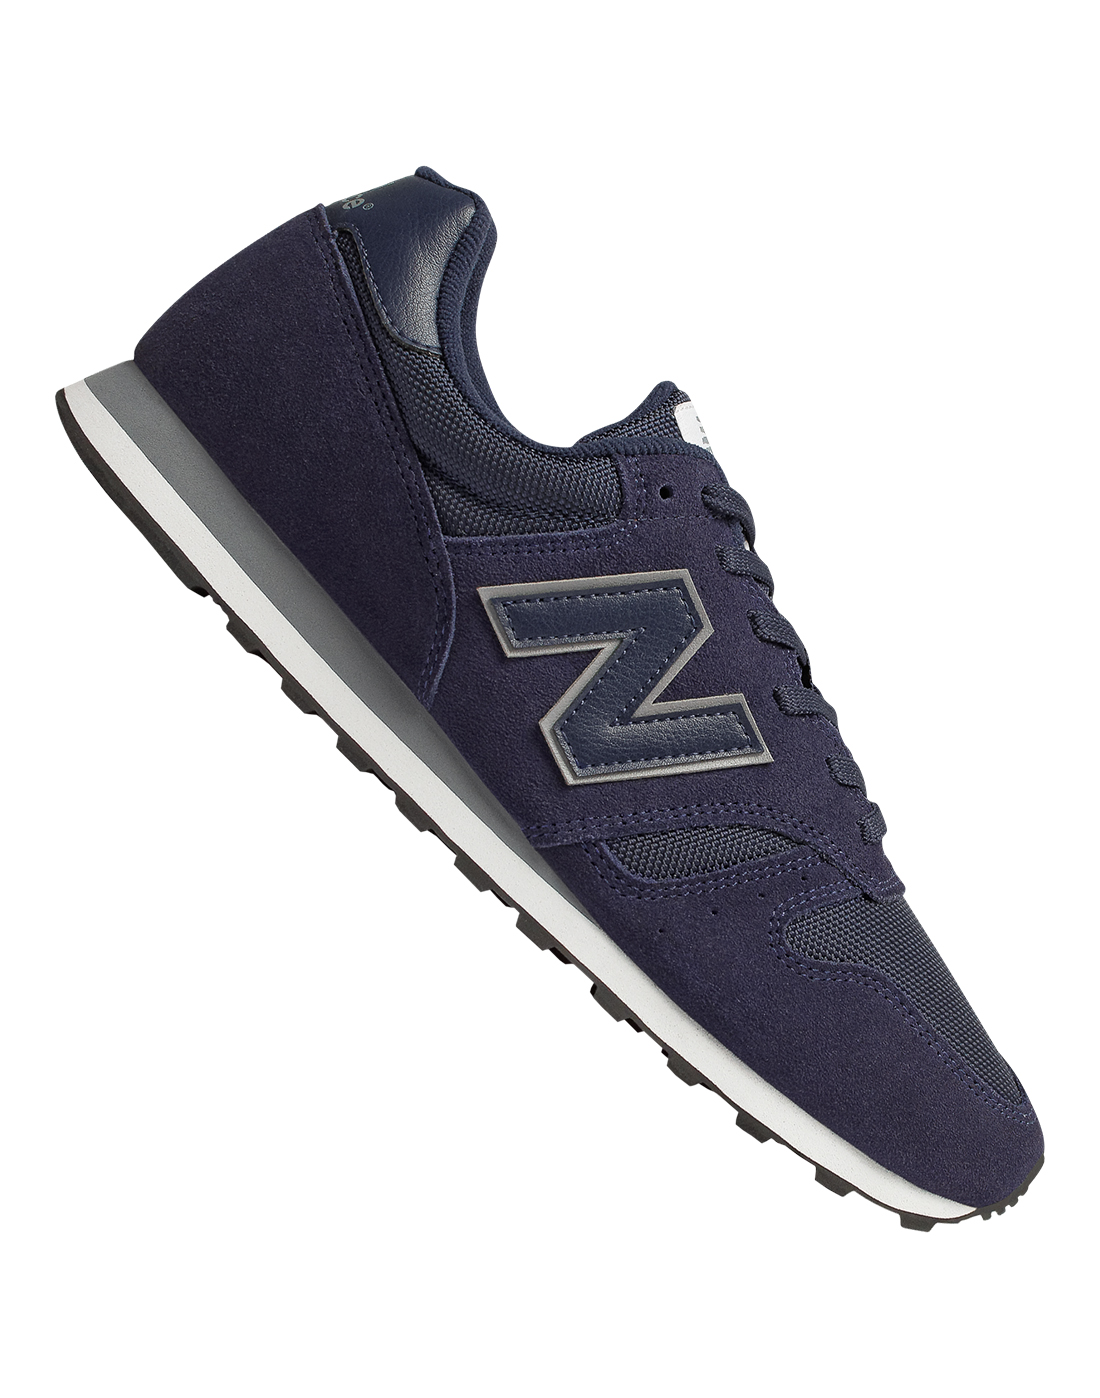 new balance black & grey 373 v1 suede trainers